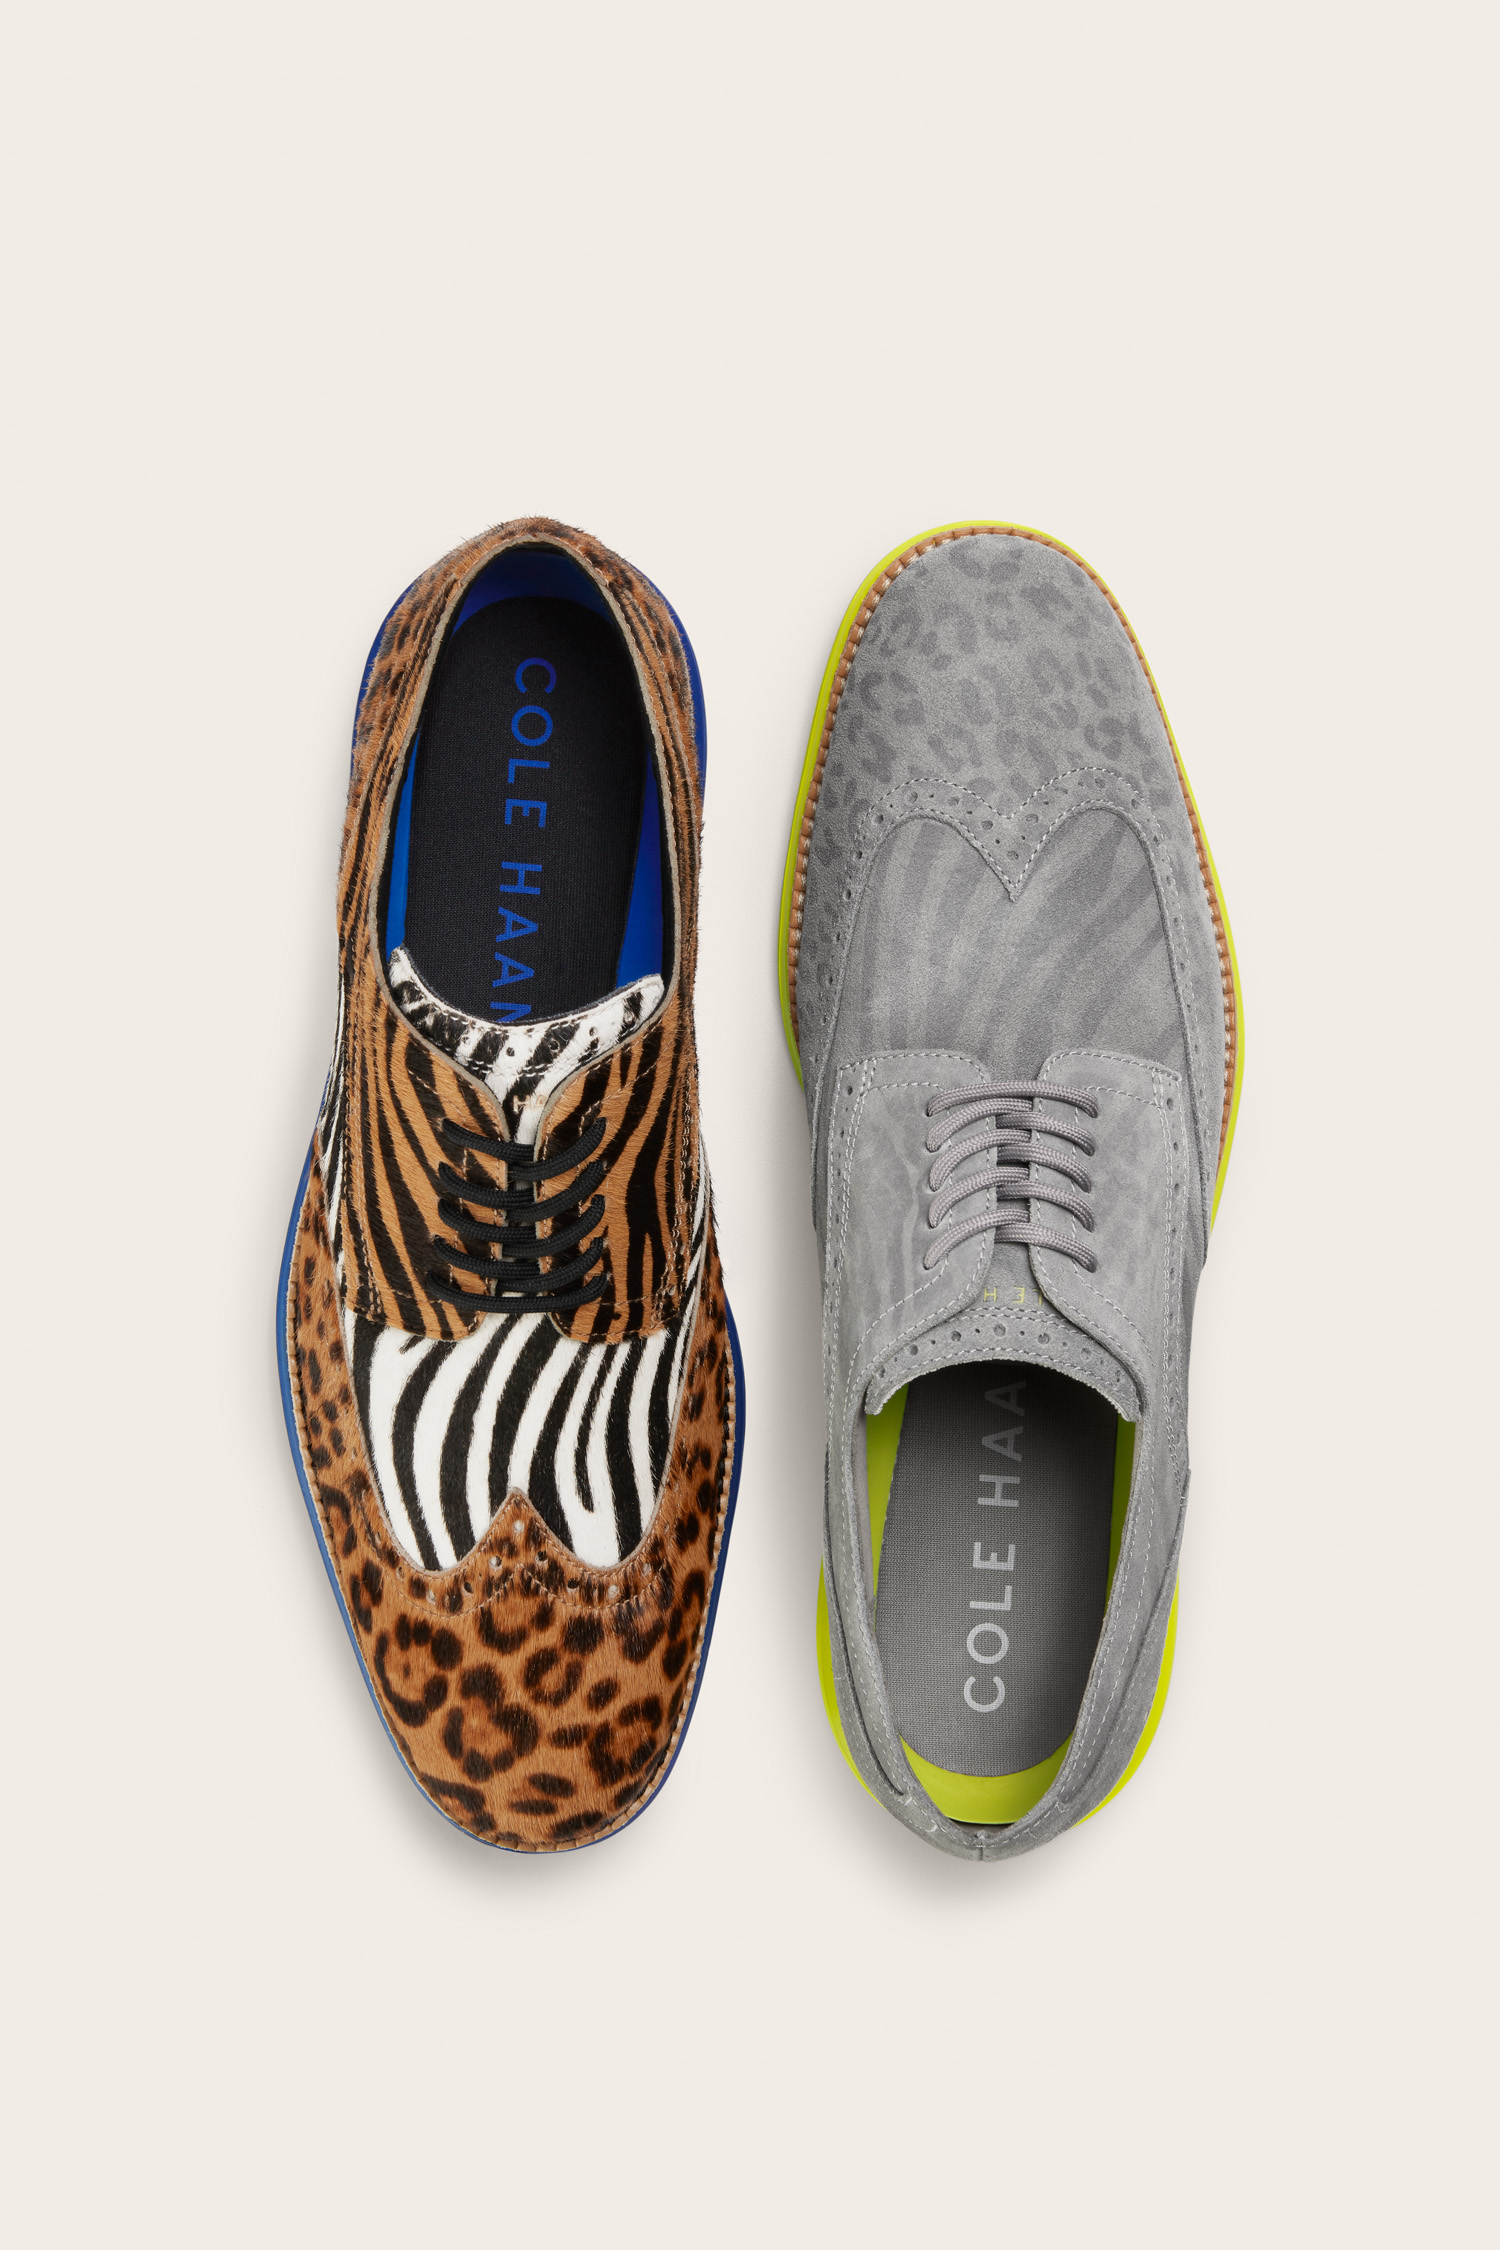 Cole Haan Celebrates Decade of Defying with Launch of Collaboration Series, Kicking off with